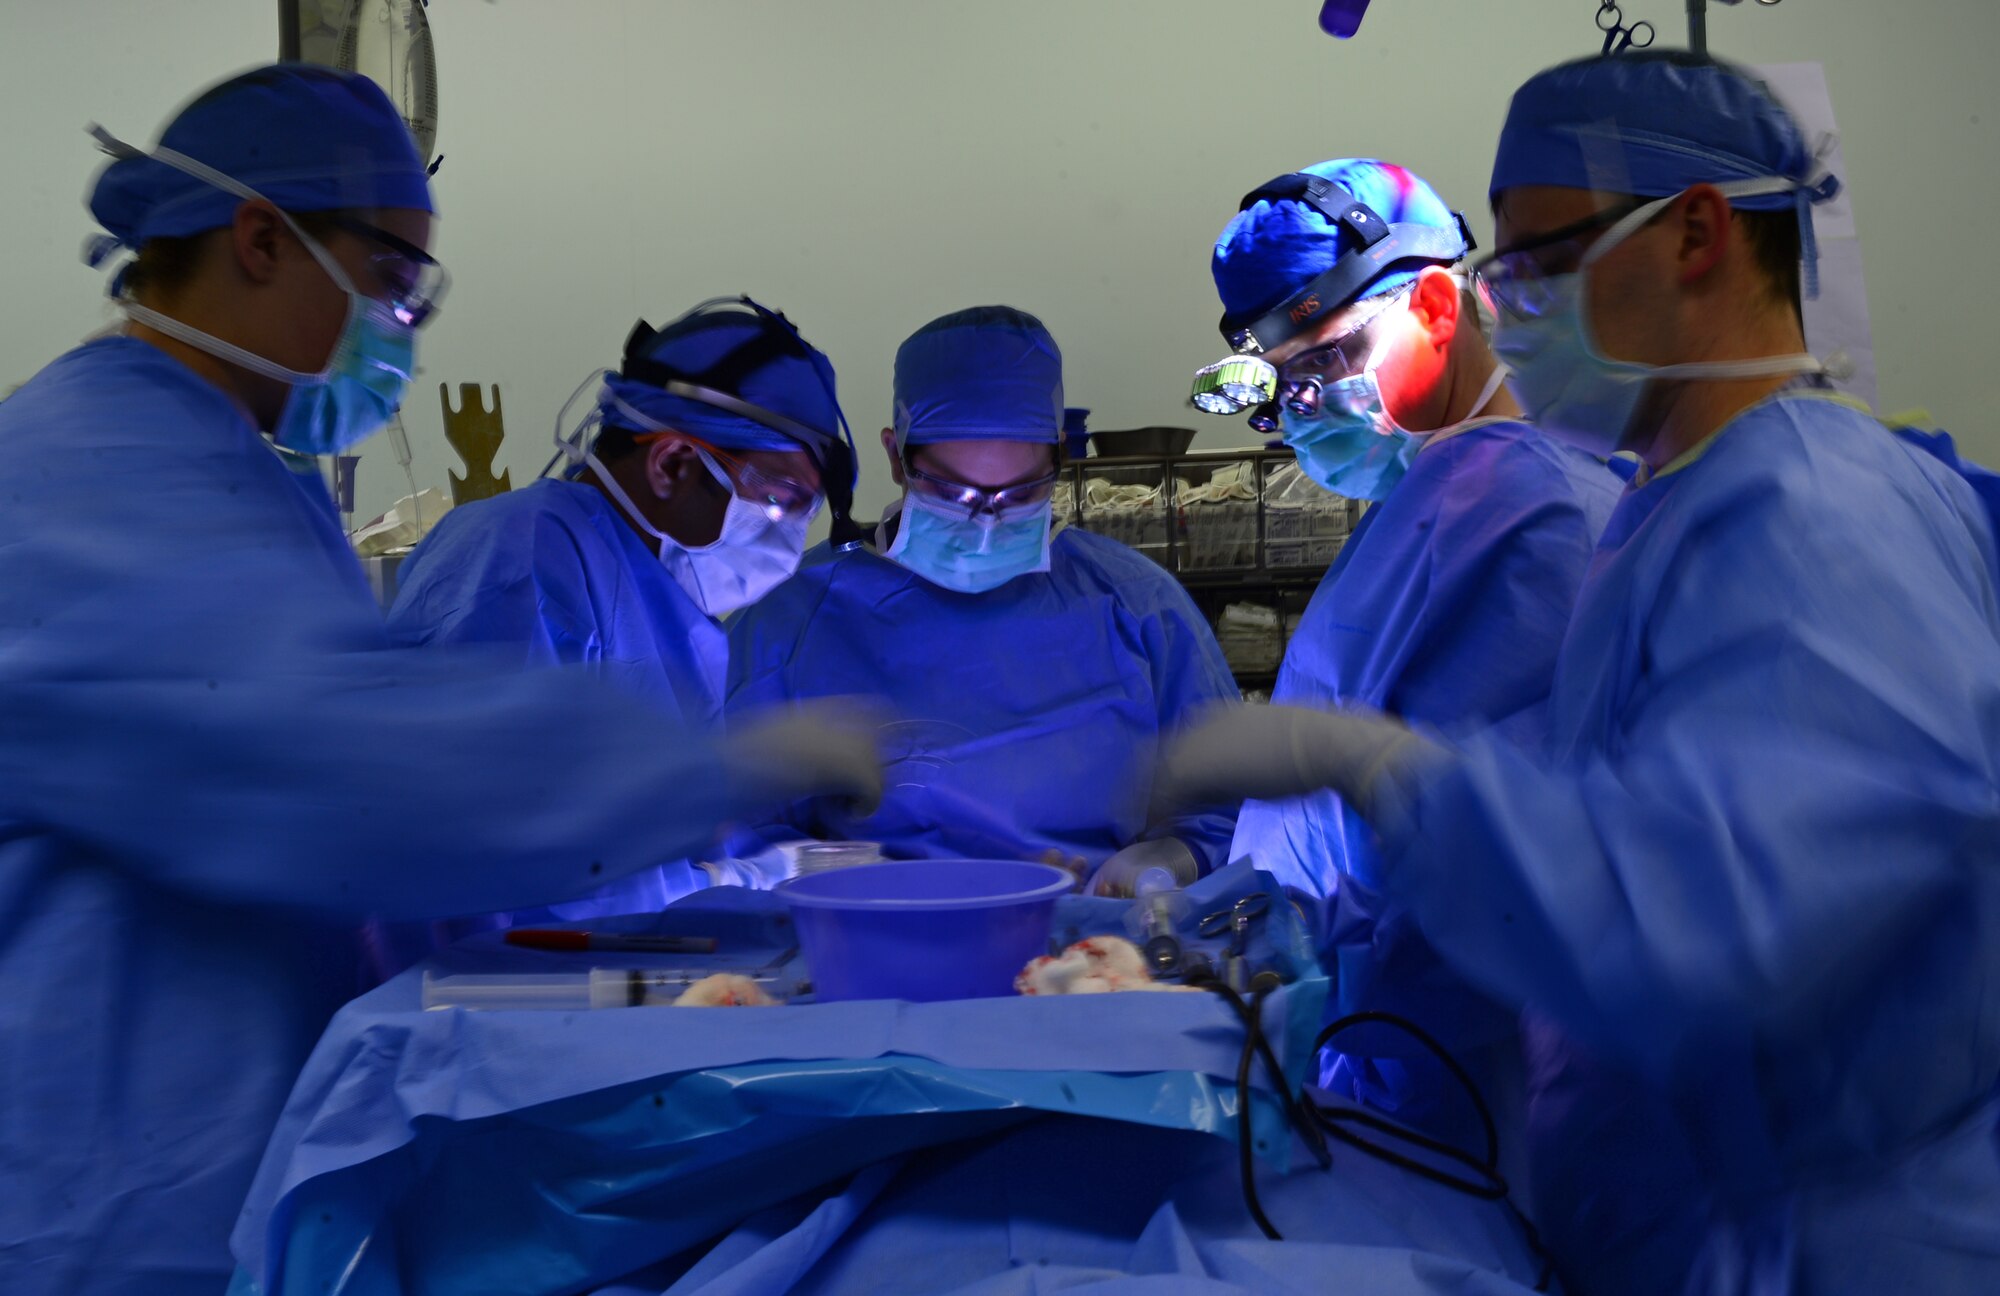 Airmen from the 48th Dental Squadron perform an orthognathic facial surgery in the hospital at Royal Air Force Lakenheath, England, July 9, 2015. The 48th DS performs approximately 300 to 500 surgeries per year, and provides dental care to more than 20,000 beneficiaries in Europe. (U.S. Air Force photo by Senior Airman Erin O’Shea/Released)